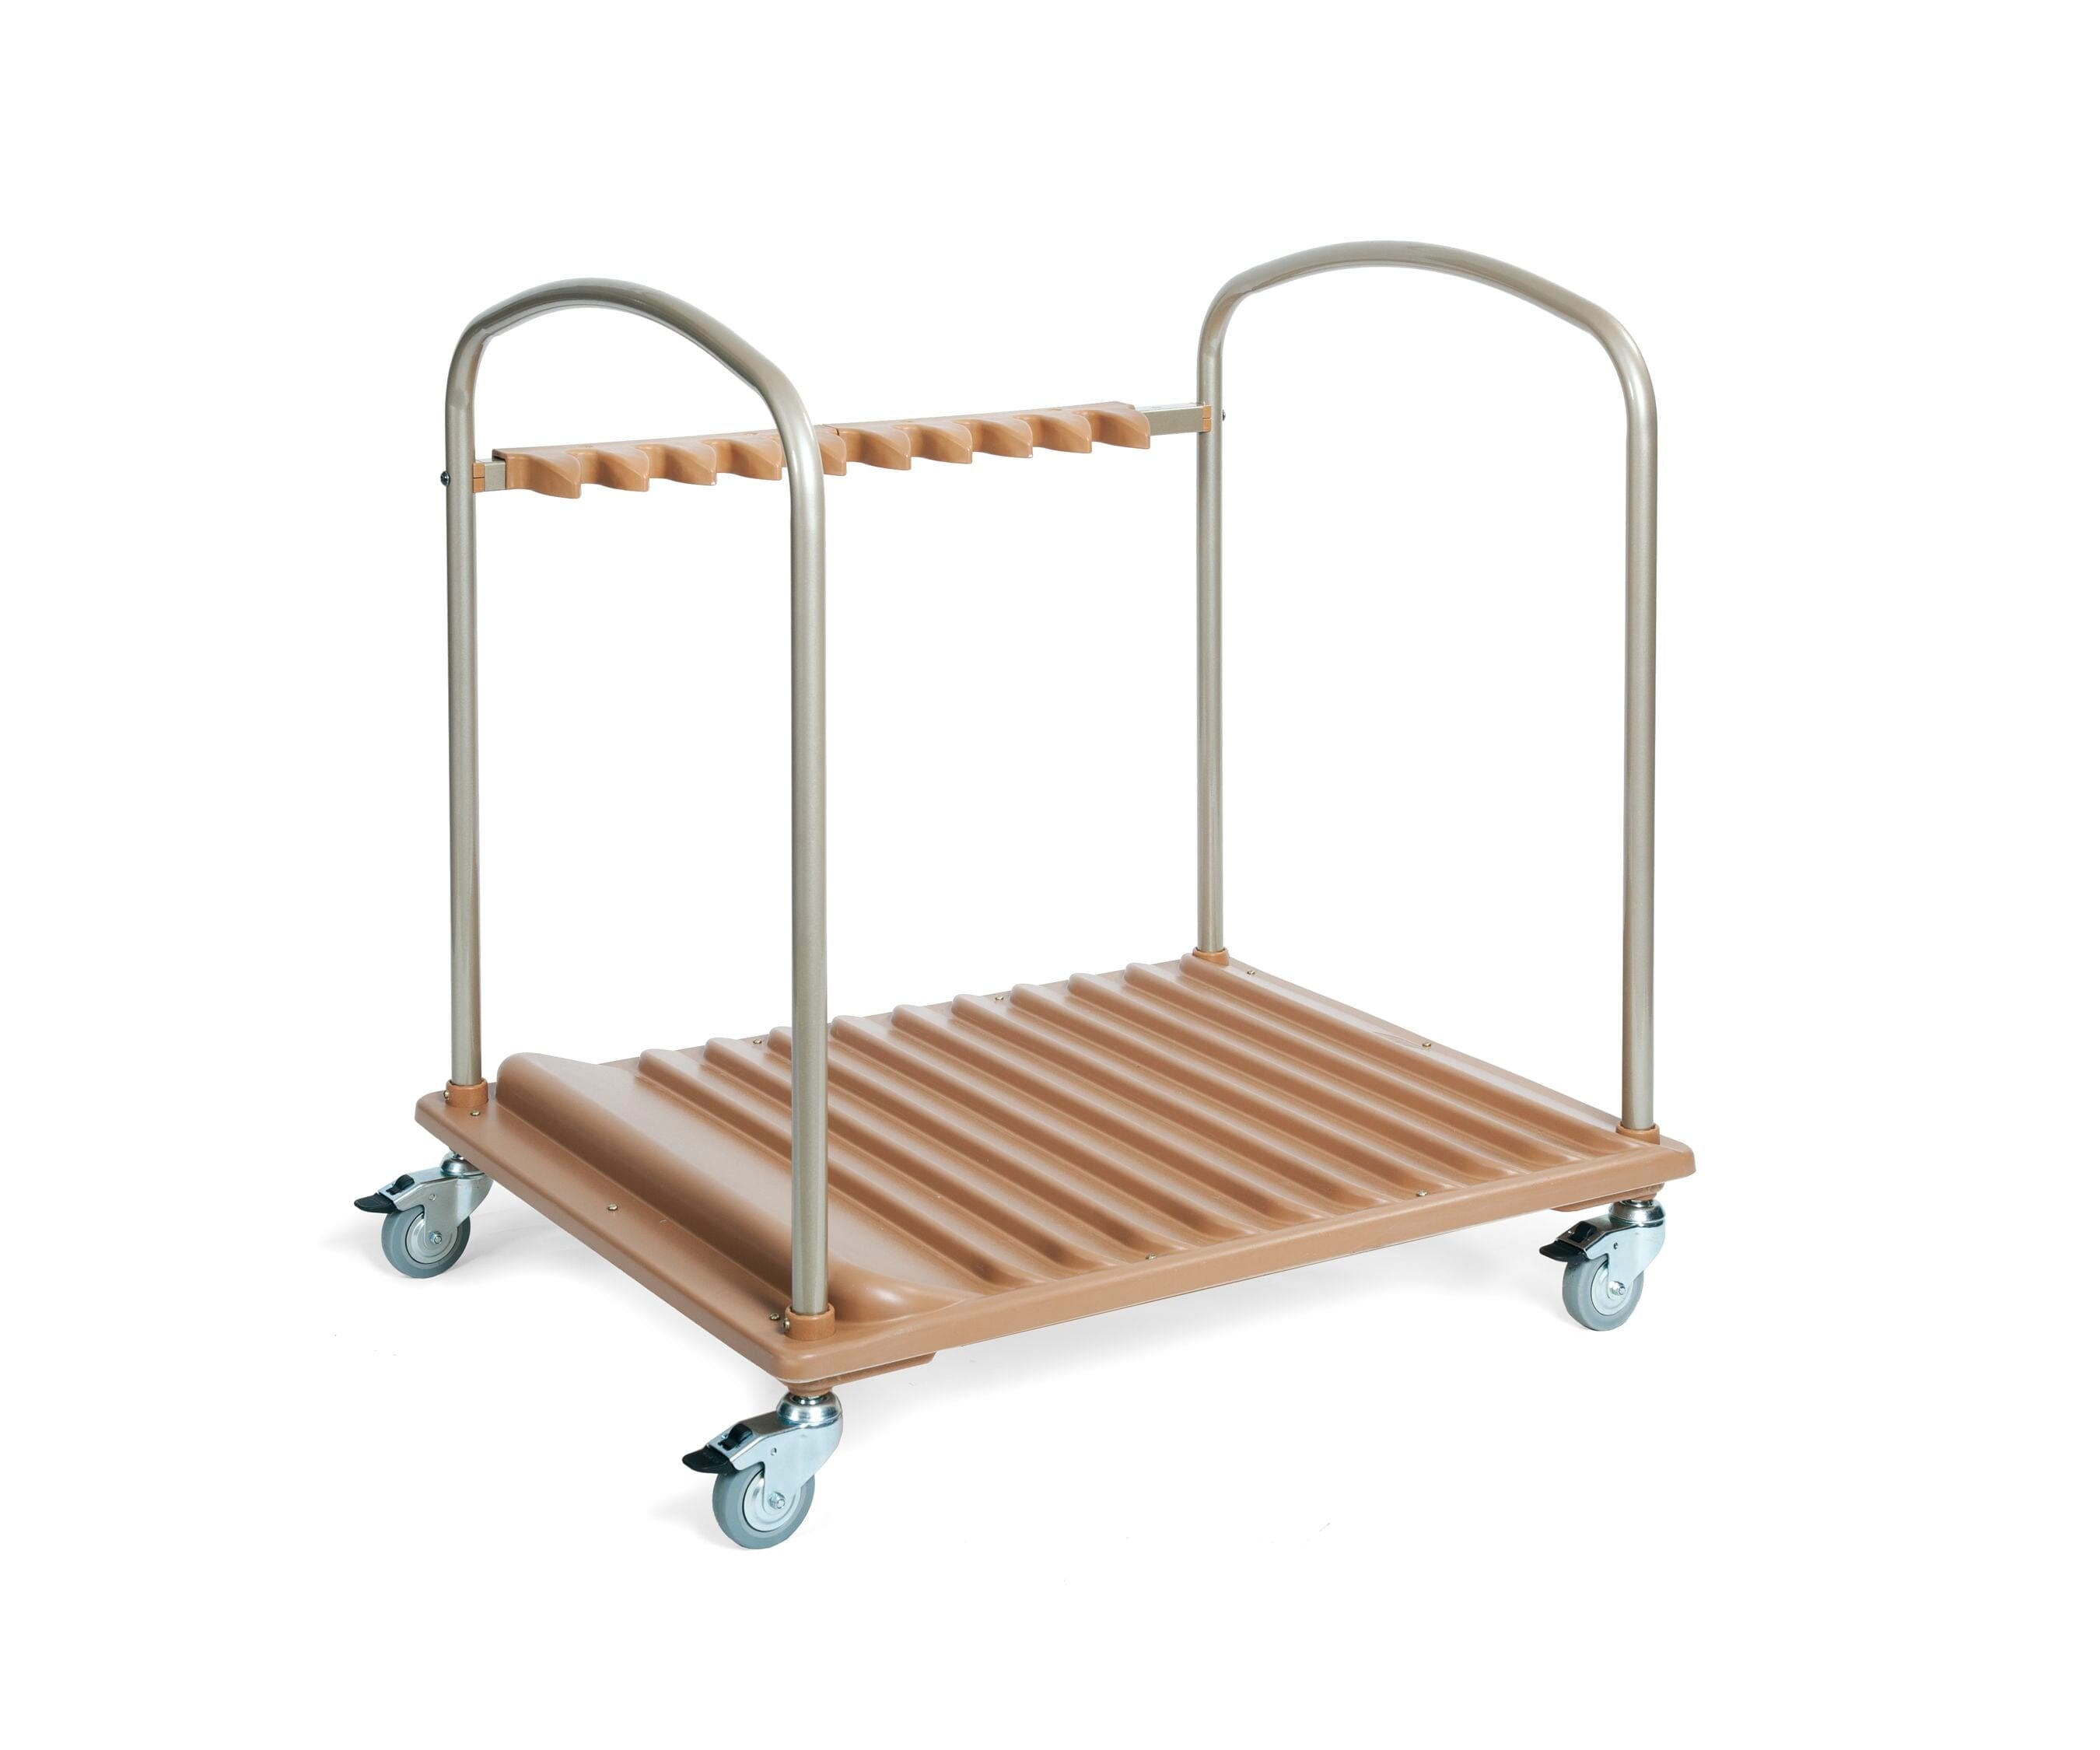 Cots and Cot Carts and Dollies, Toddler-Size from Community Playthings - louisekool